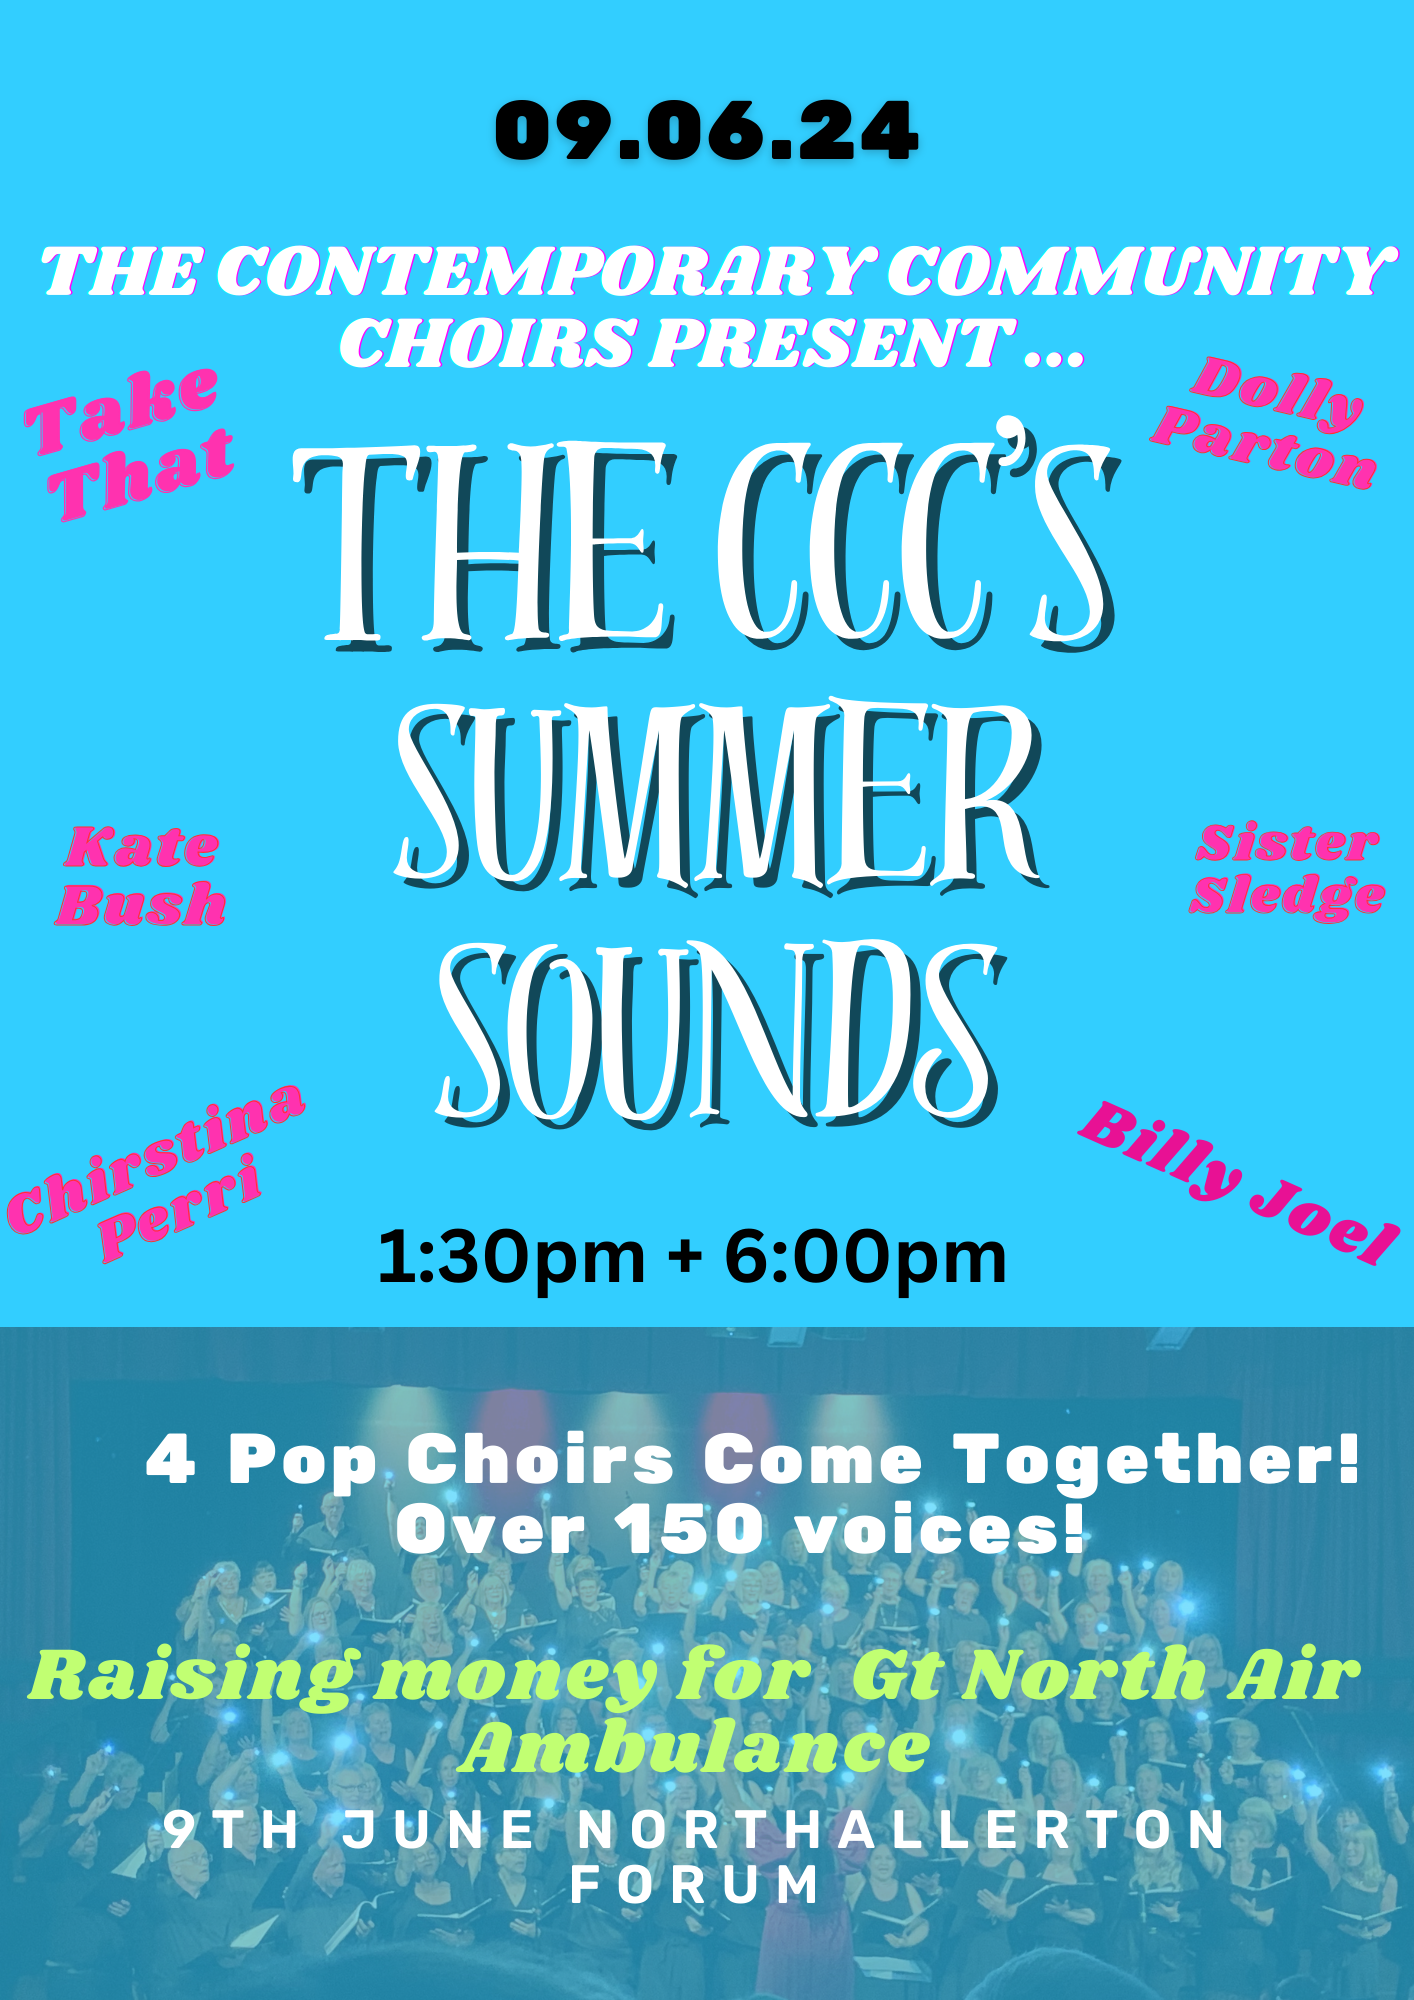 THE CCC'S SUMMER SOUNDS